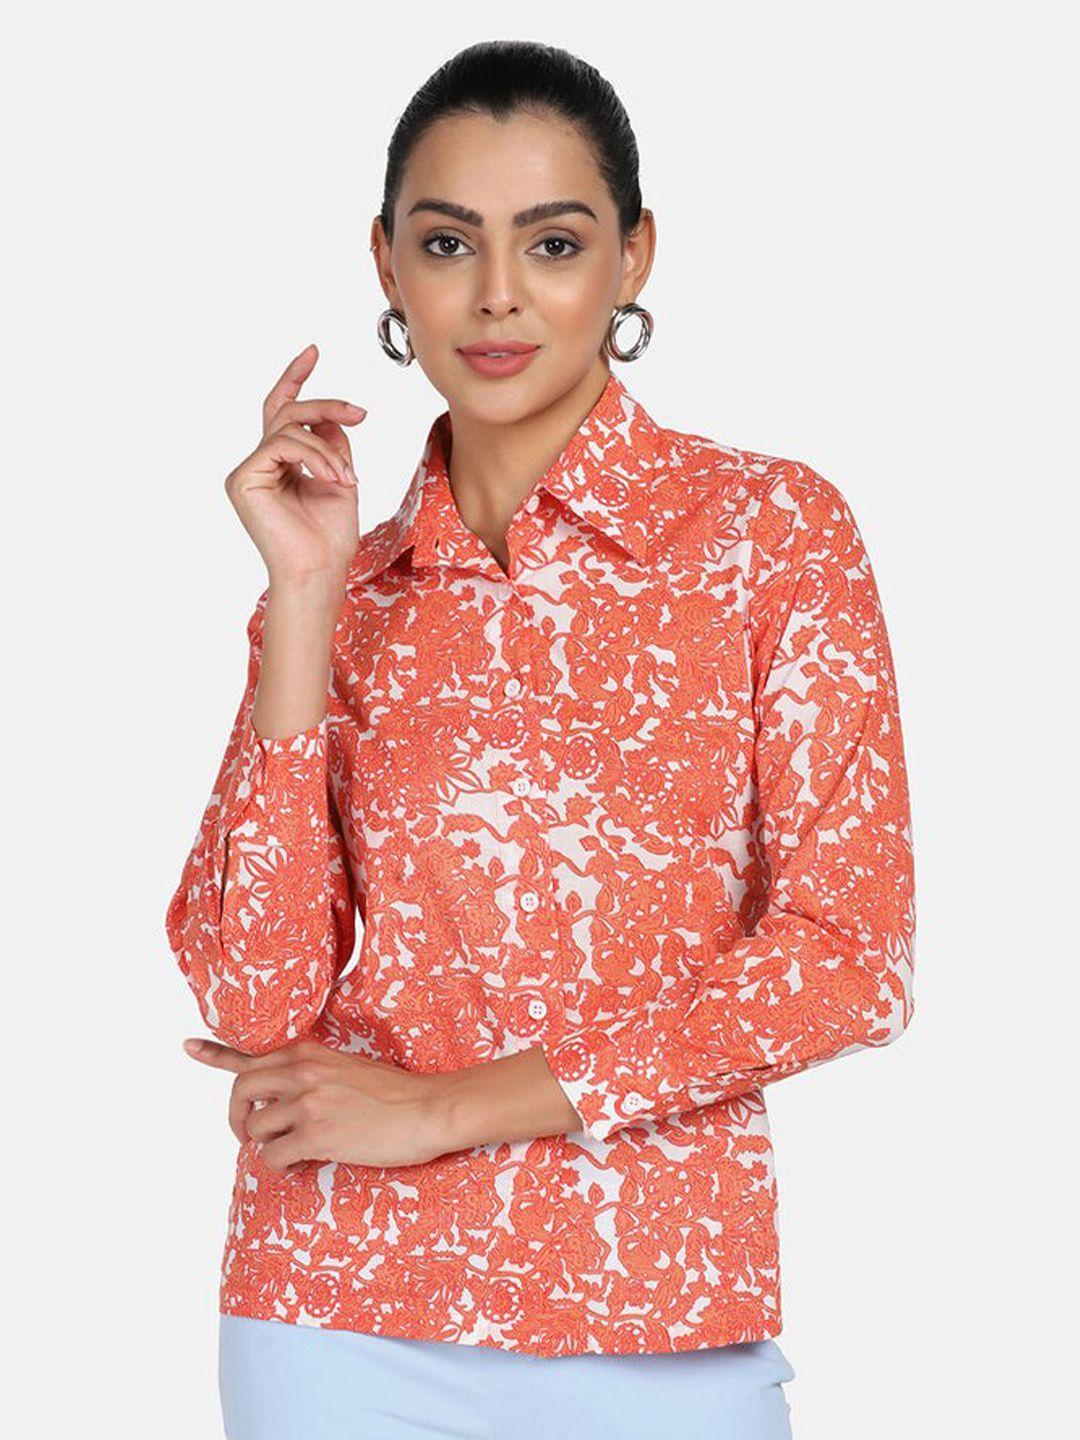 powersutra women orange and white floral printed cotton regular fit casual shirt